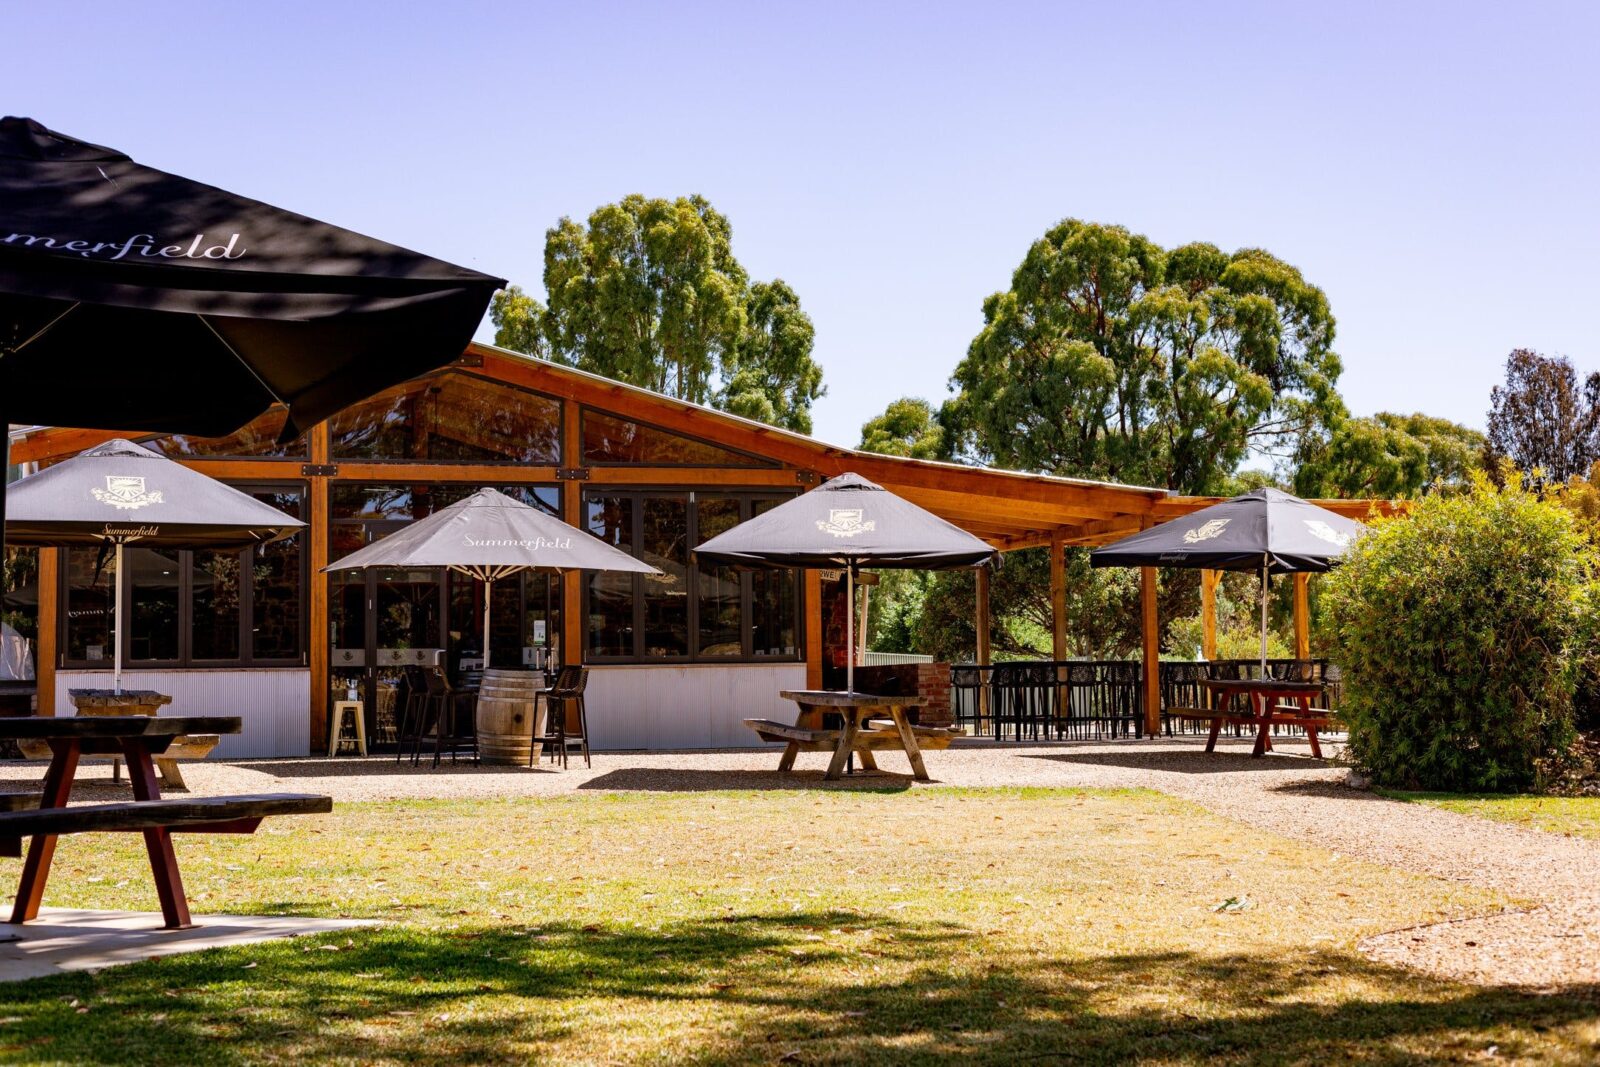 The café and cellar door now includes an indoor/outdoor dining space for up to 50 guests.